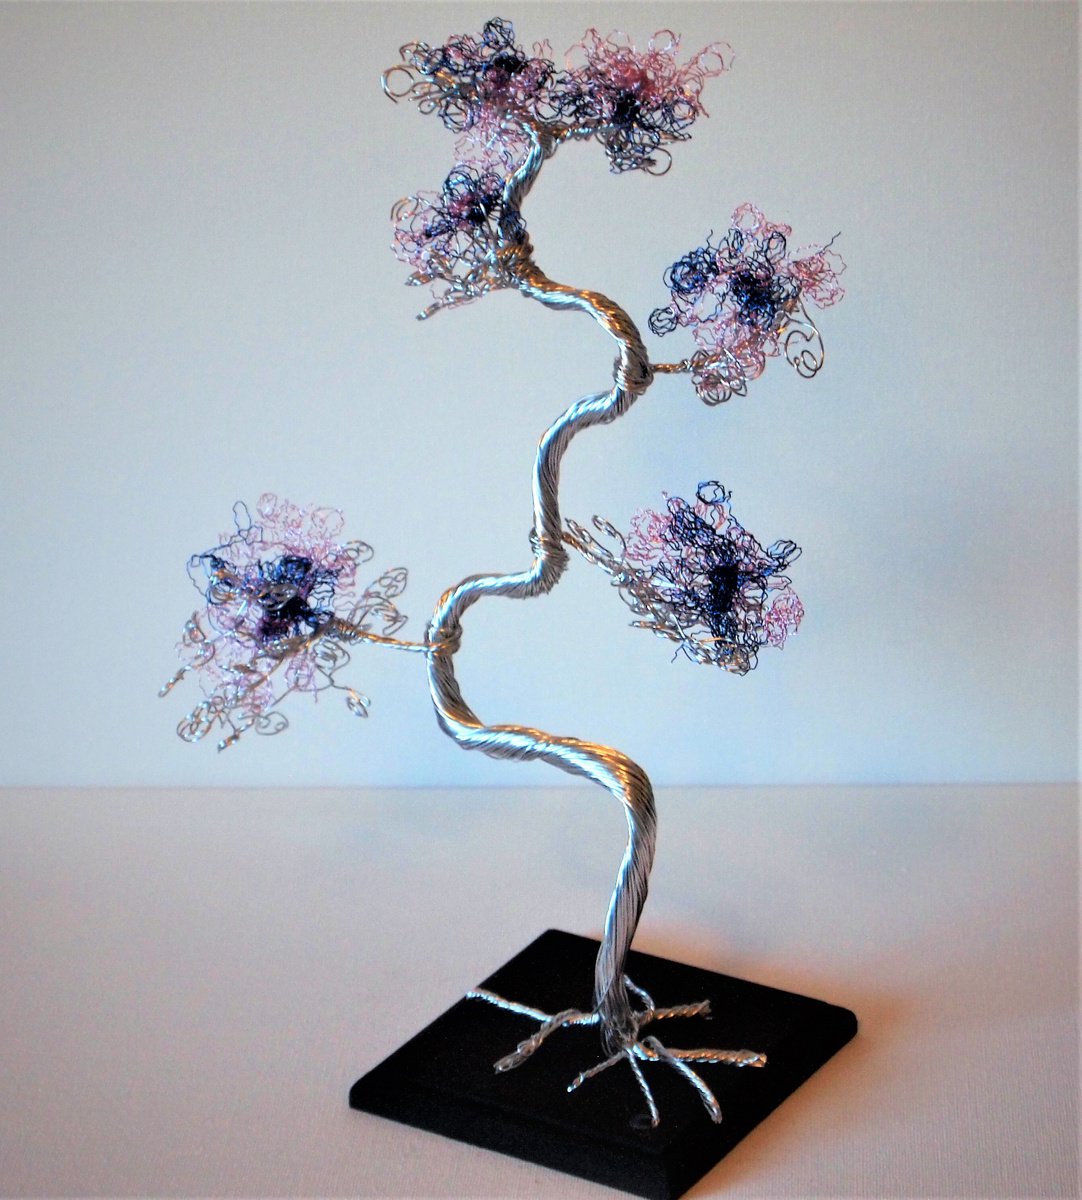 Silver, Blue & Pink Wire, Bonsai Tree Sculpture by Steph Morgan